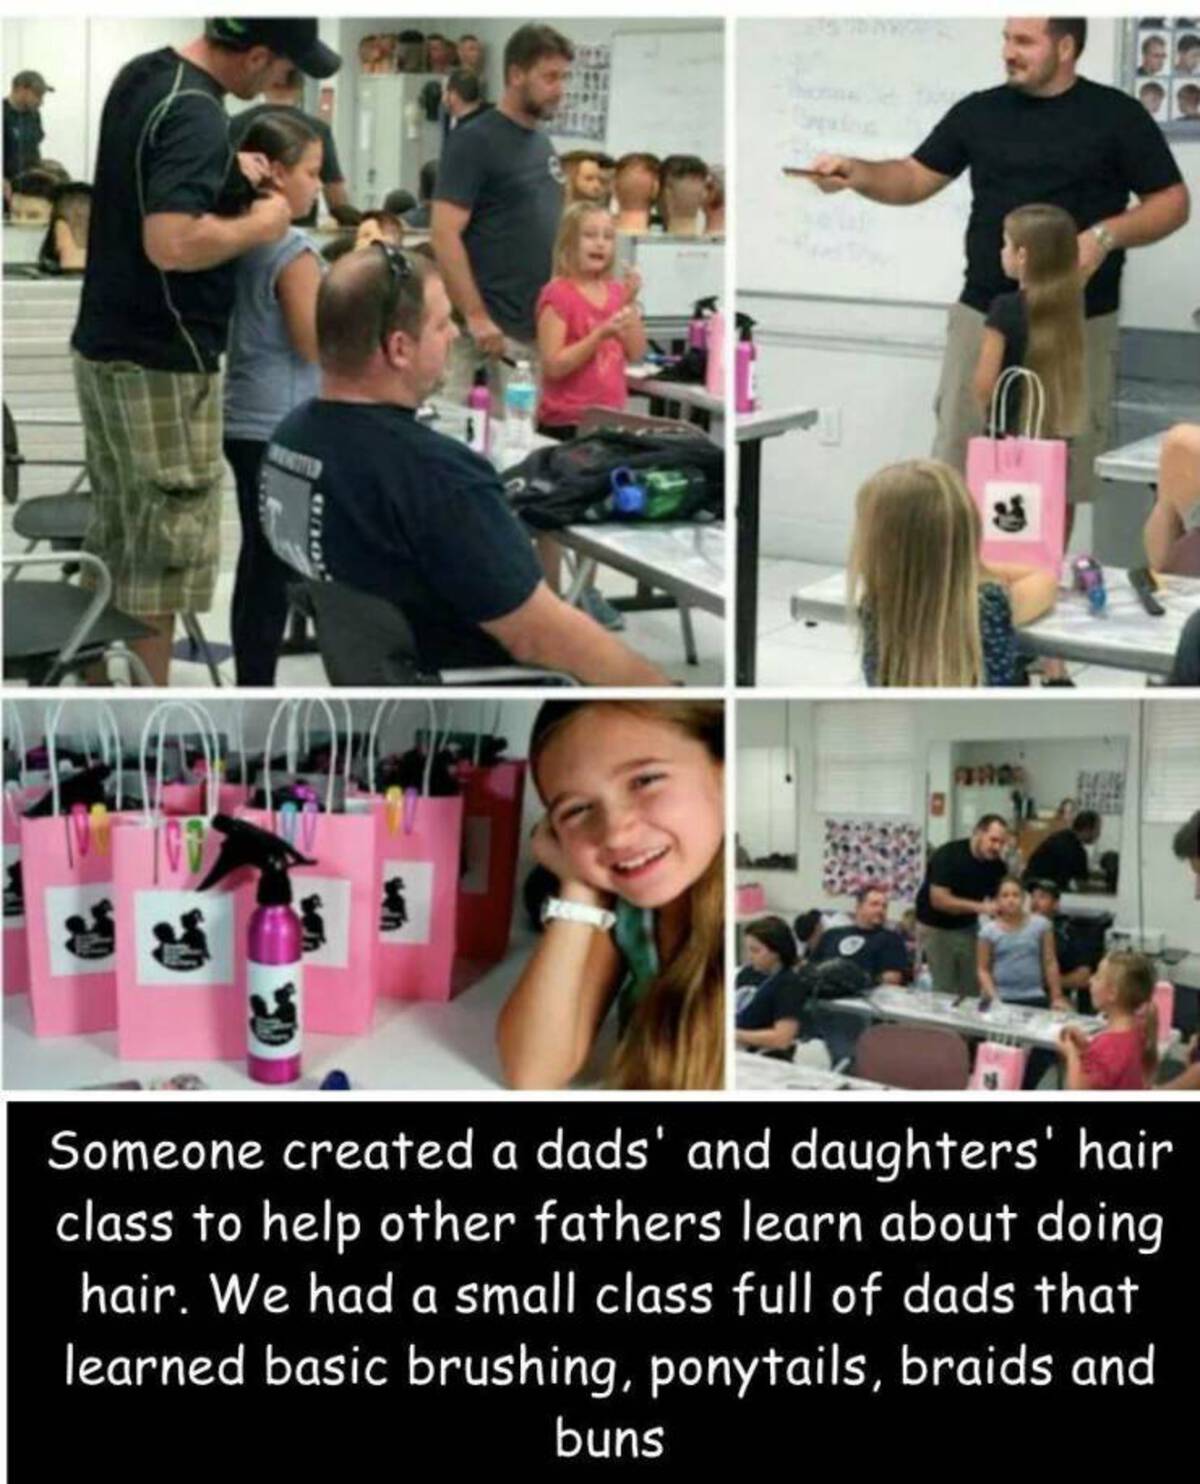 shoulder - Renited Ce Someone created a dads' and daughters' hair class to help other fathers learn about doing hair. We had a small class full of dads that learned basic brushing, ponytails, braids and buns